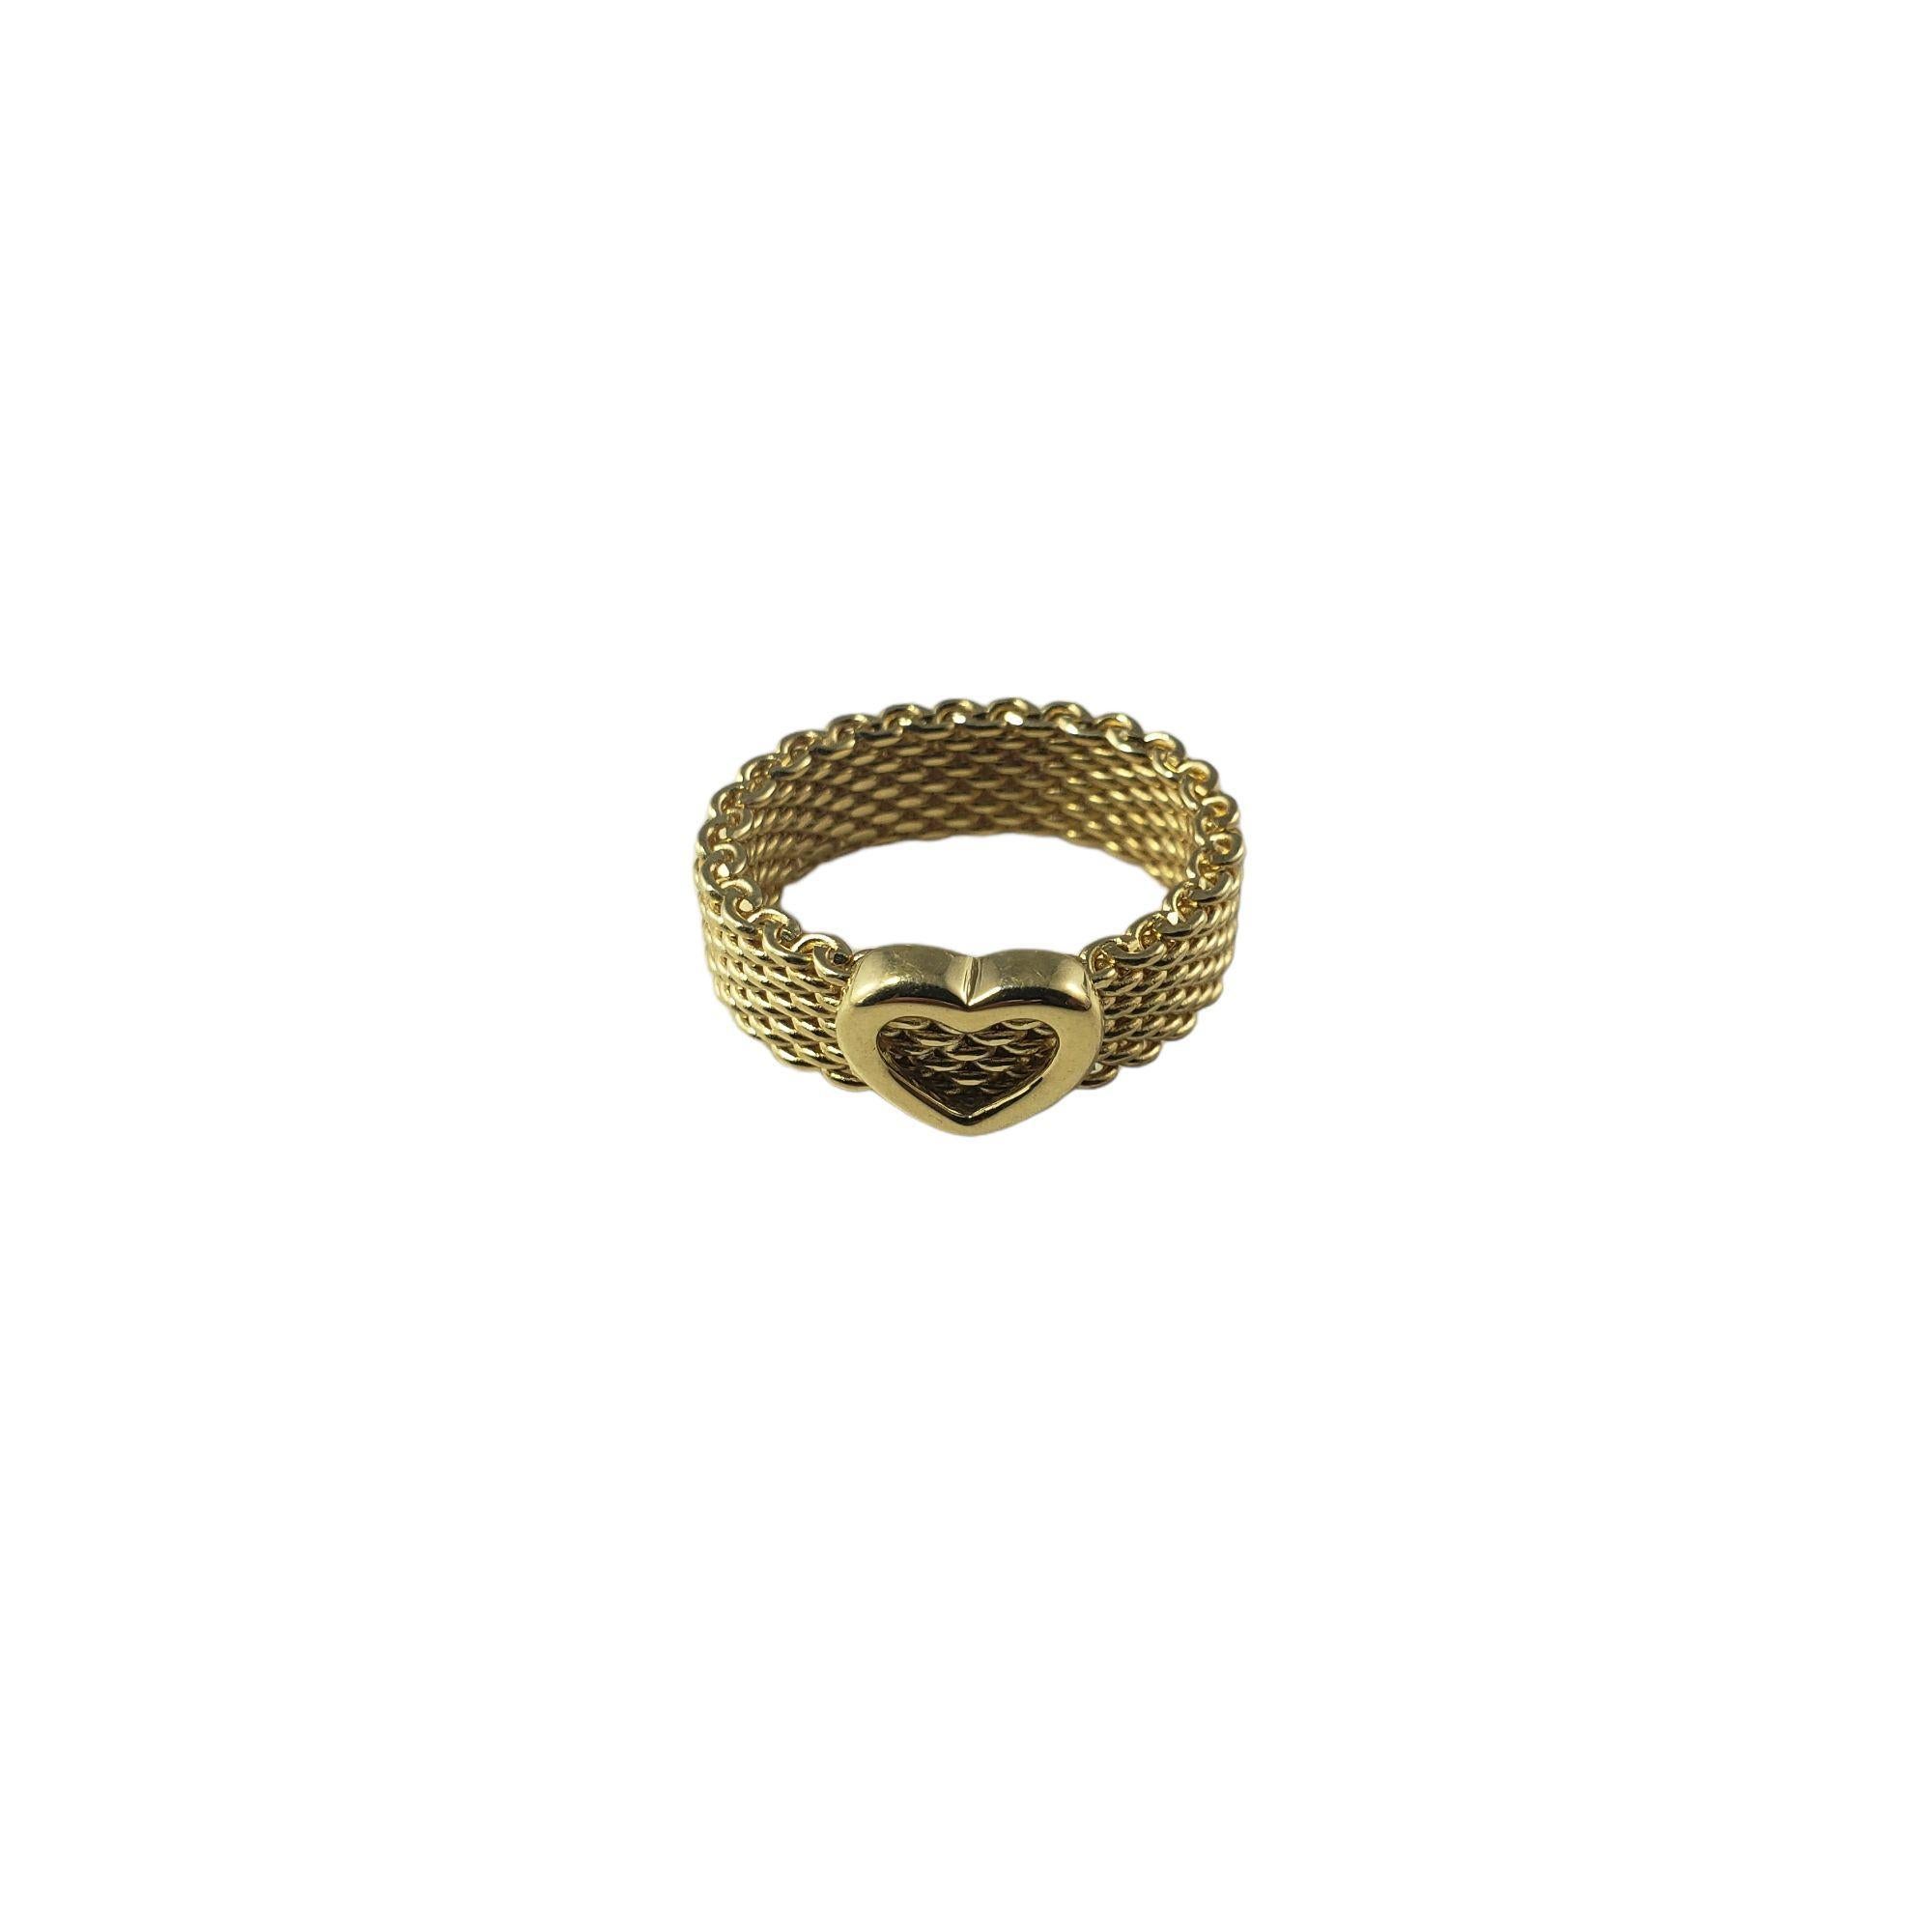 Tiffany & Co. 18 Karat Yellow Gold Somerset Heart Mesh Ring Size 5

This stunning heart mesh ring by Tiffany & Co. is crafted in meticulously detailed 18K yellow gold. 

Width: 6 mm.

Ring Size: 5

Weight: 7.0 gr./ 4.5 dwt.

Hallmark: T&CO 750

Very